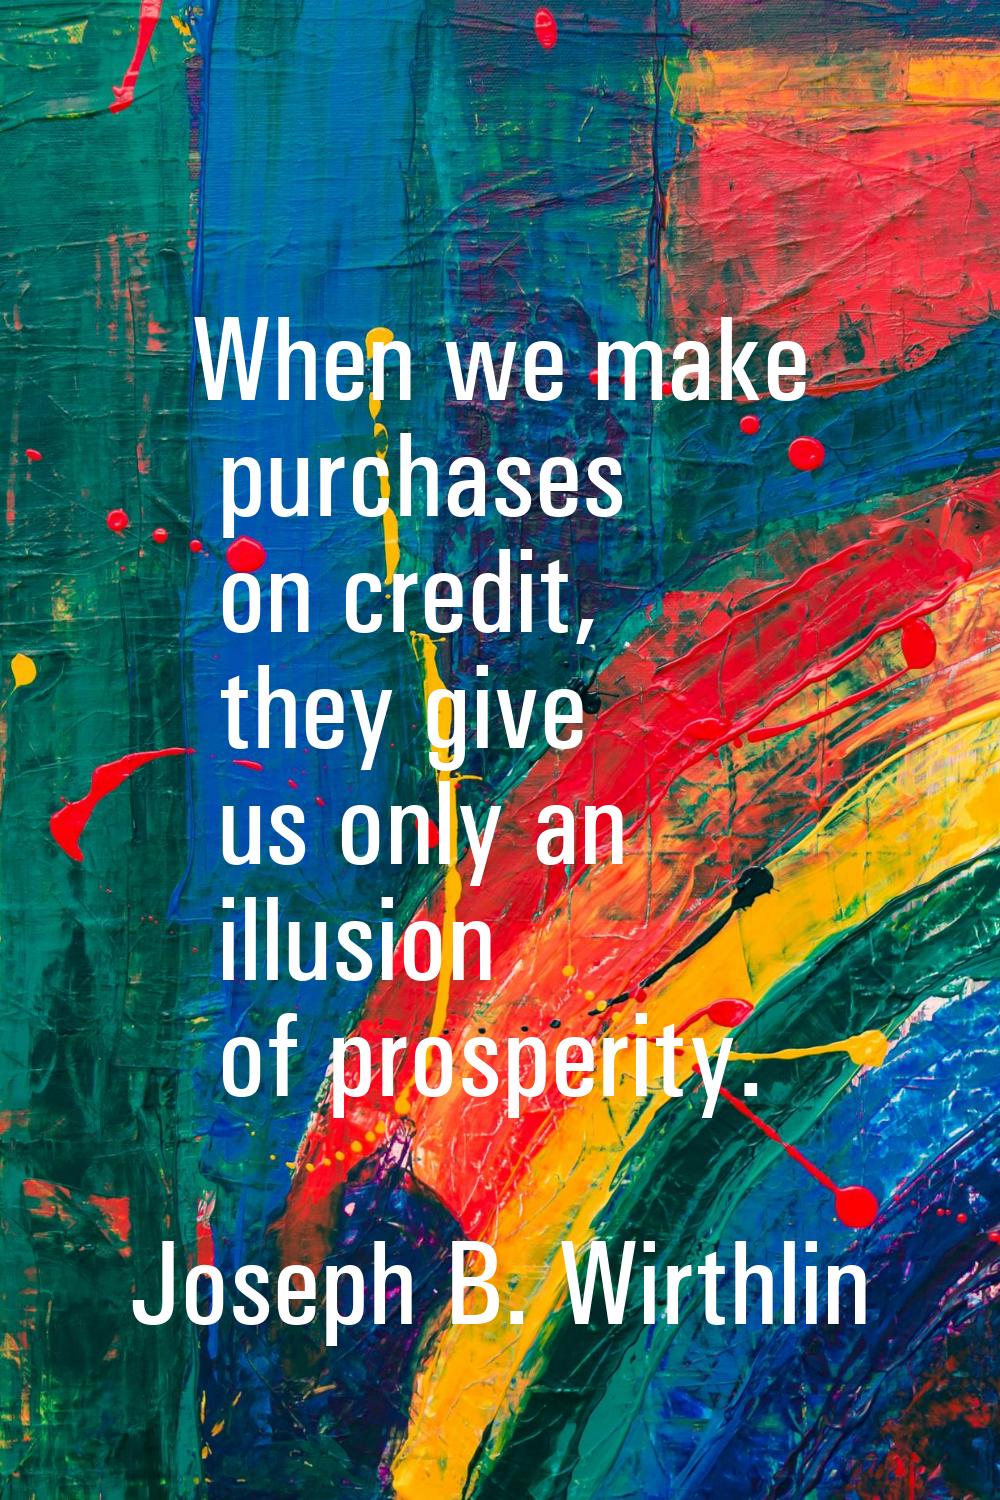 When we make purchases on credit, they give us only an illusion of prosperity.